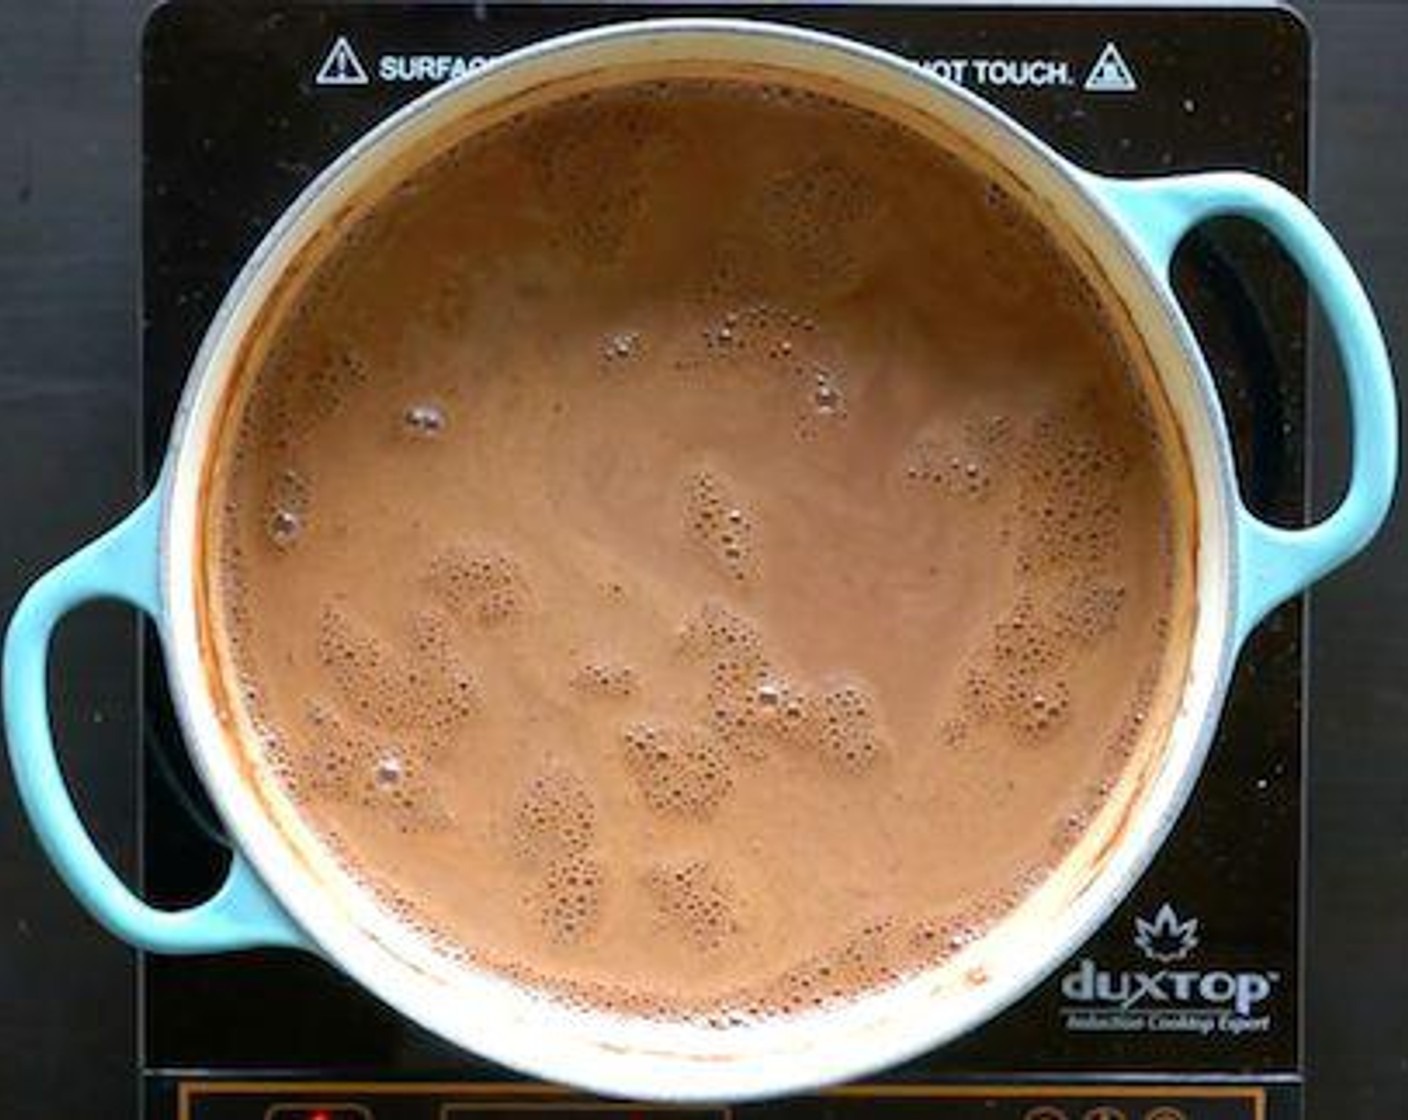 step 1 Whisk Whole Milk (3 cups), Pure Cane Sugar (3/4 cup) and Unsweetened Cocoa Powder (2/3 cup) in a ceramic or anodized stainless steel saucepan over medium-high heat. Bring to simmer. Remove from heat.